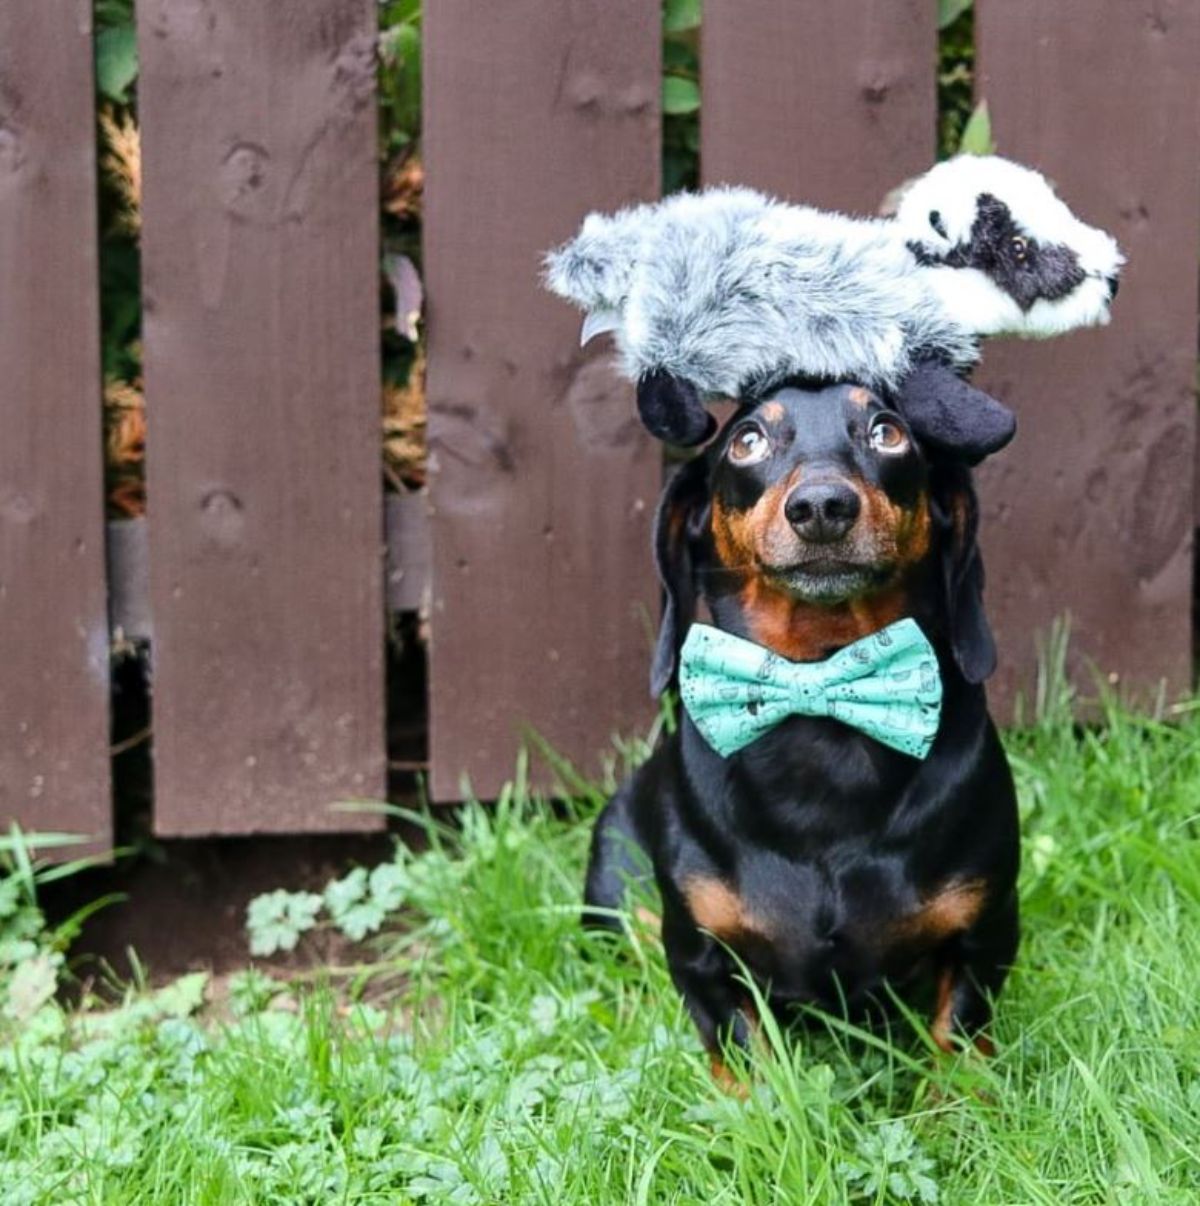 black and brown dachshund with a white and black badger stuffed toy on the head and the dog is wearing a green and black bowtie